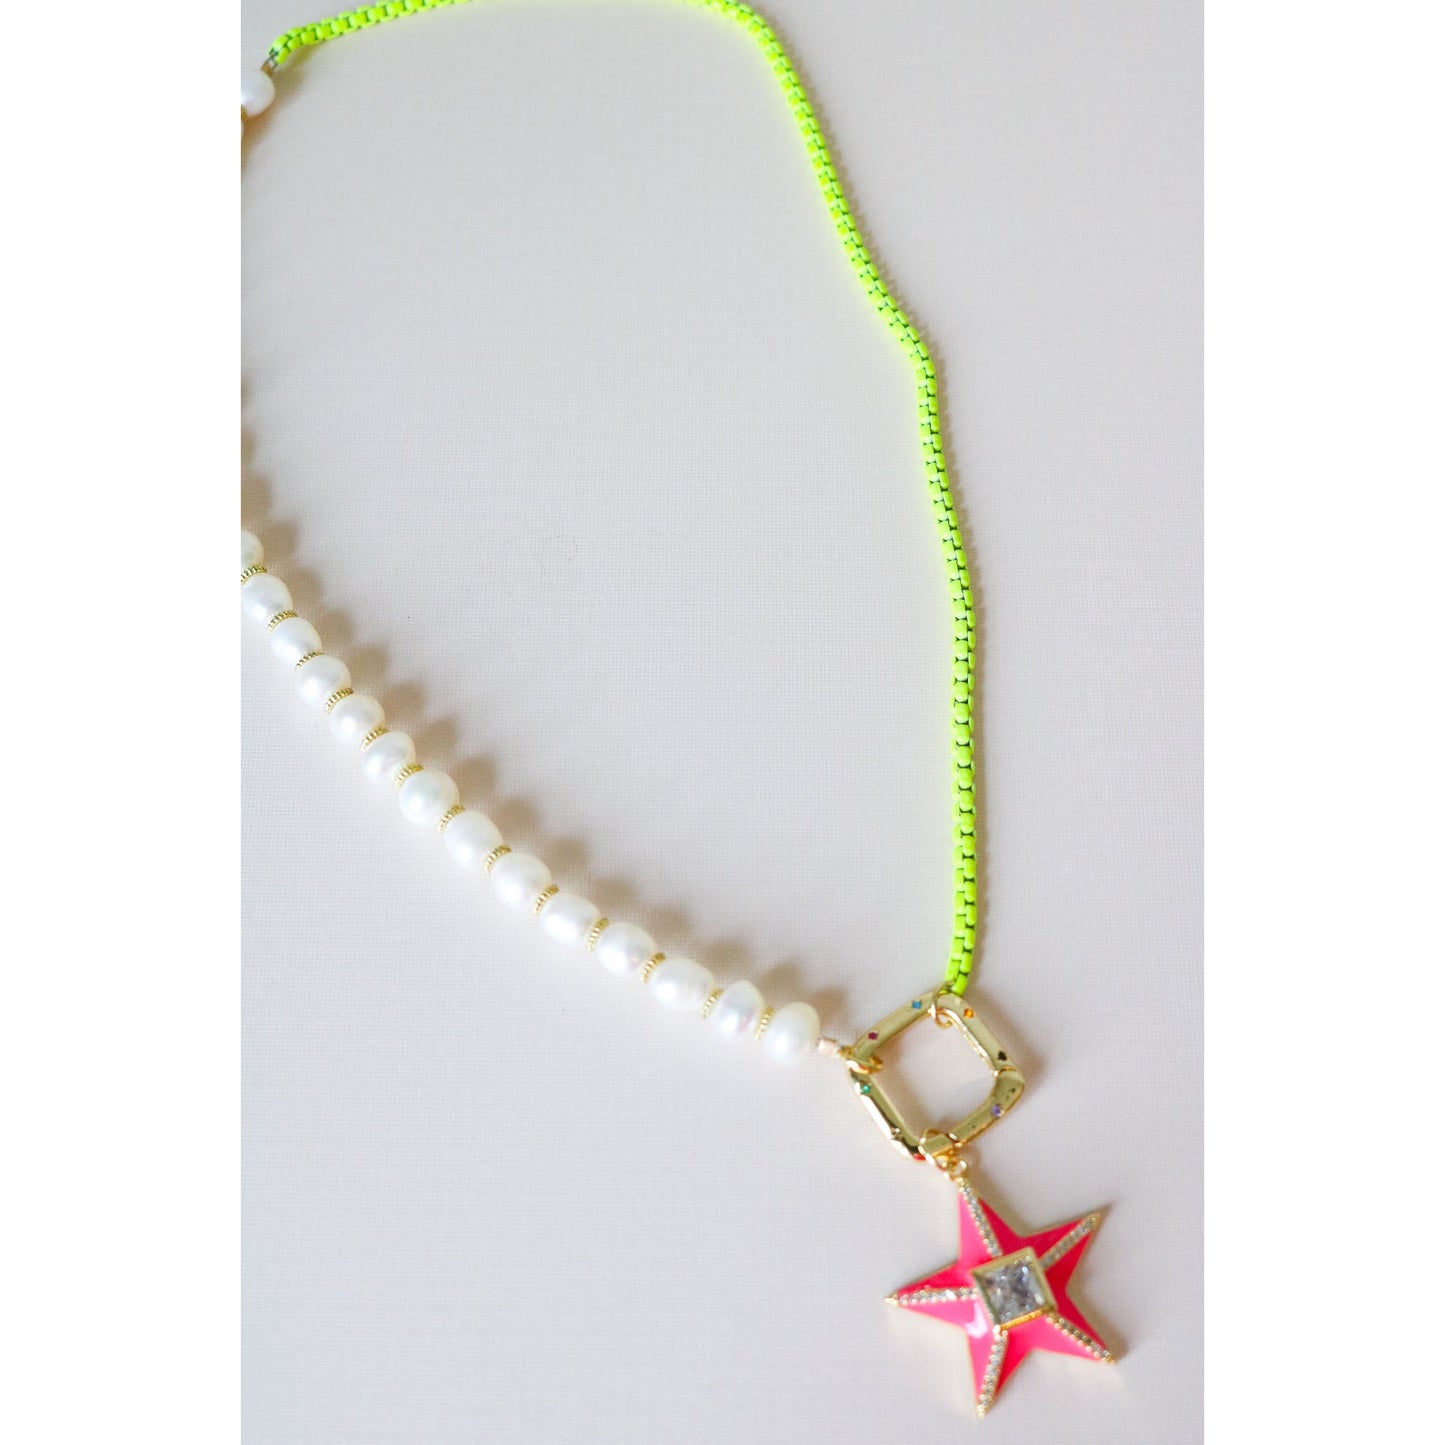 Hot Pink Star Necklace Earrings Women Friendship Gifts for Girl Teenager  Jewelry | eBay